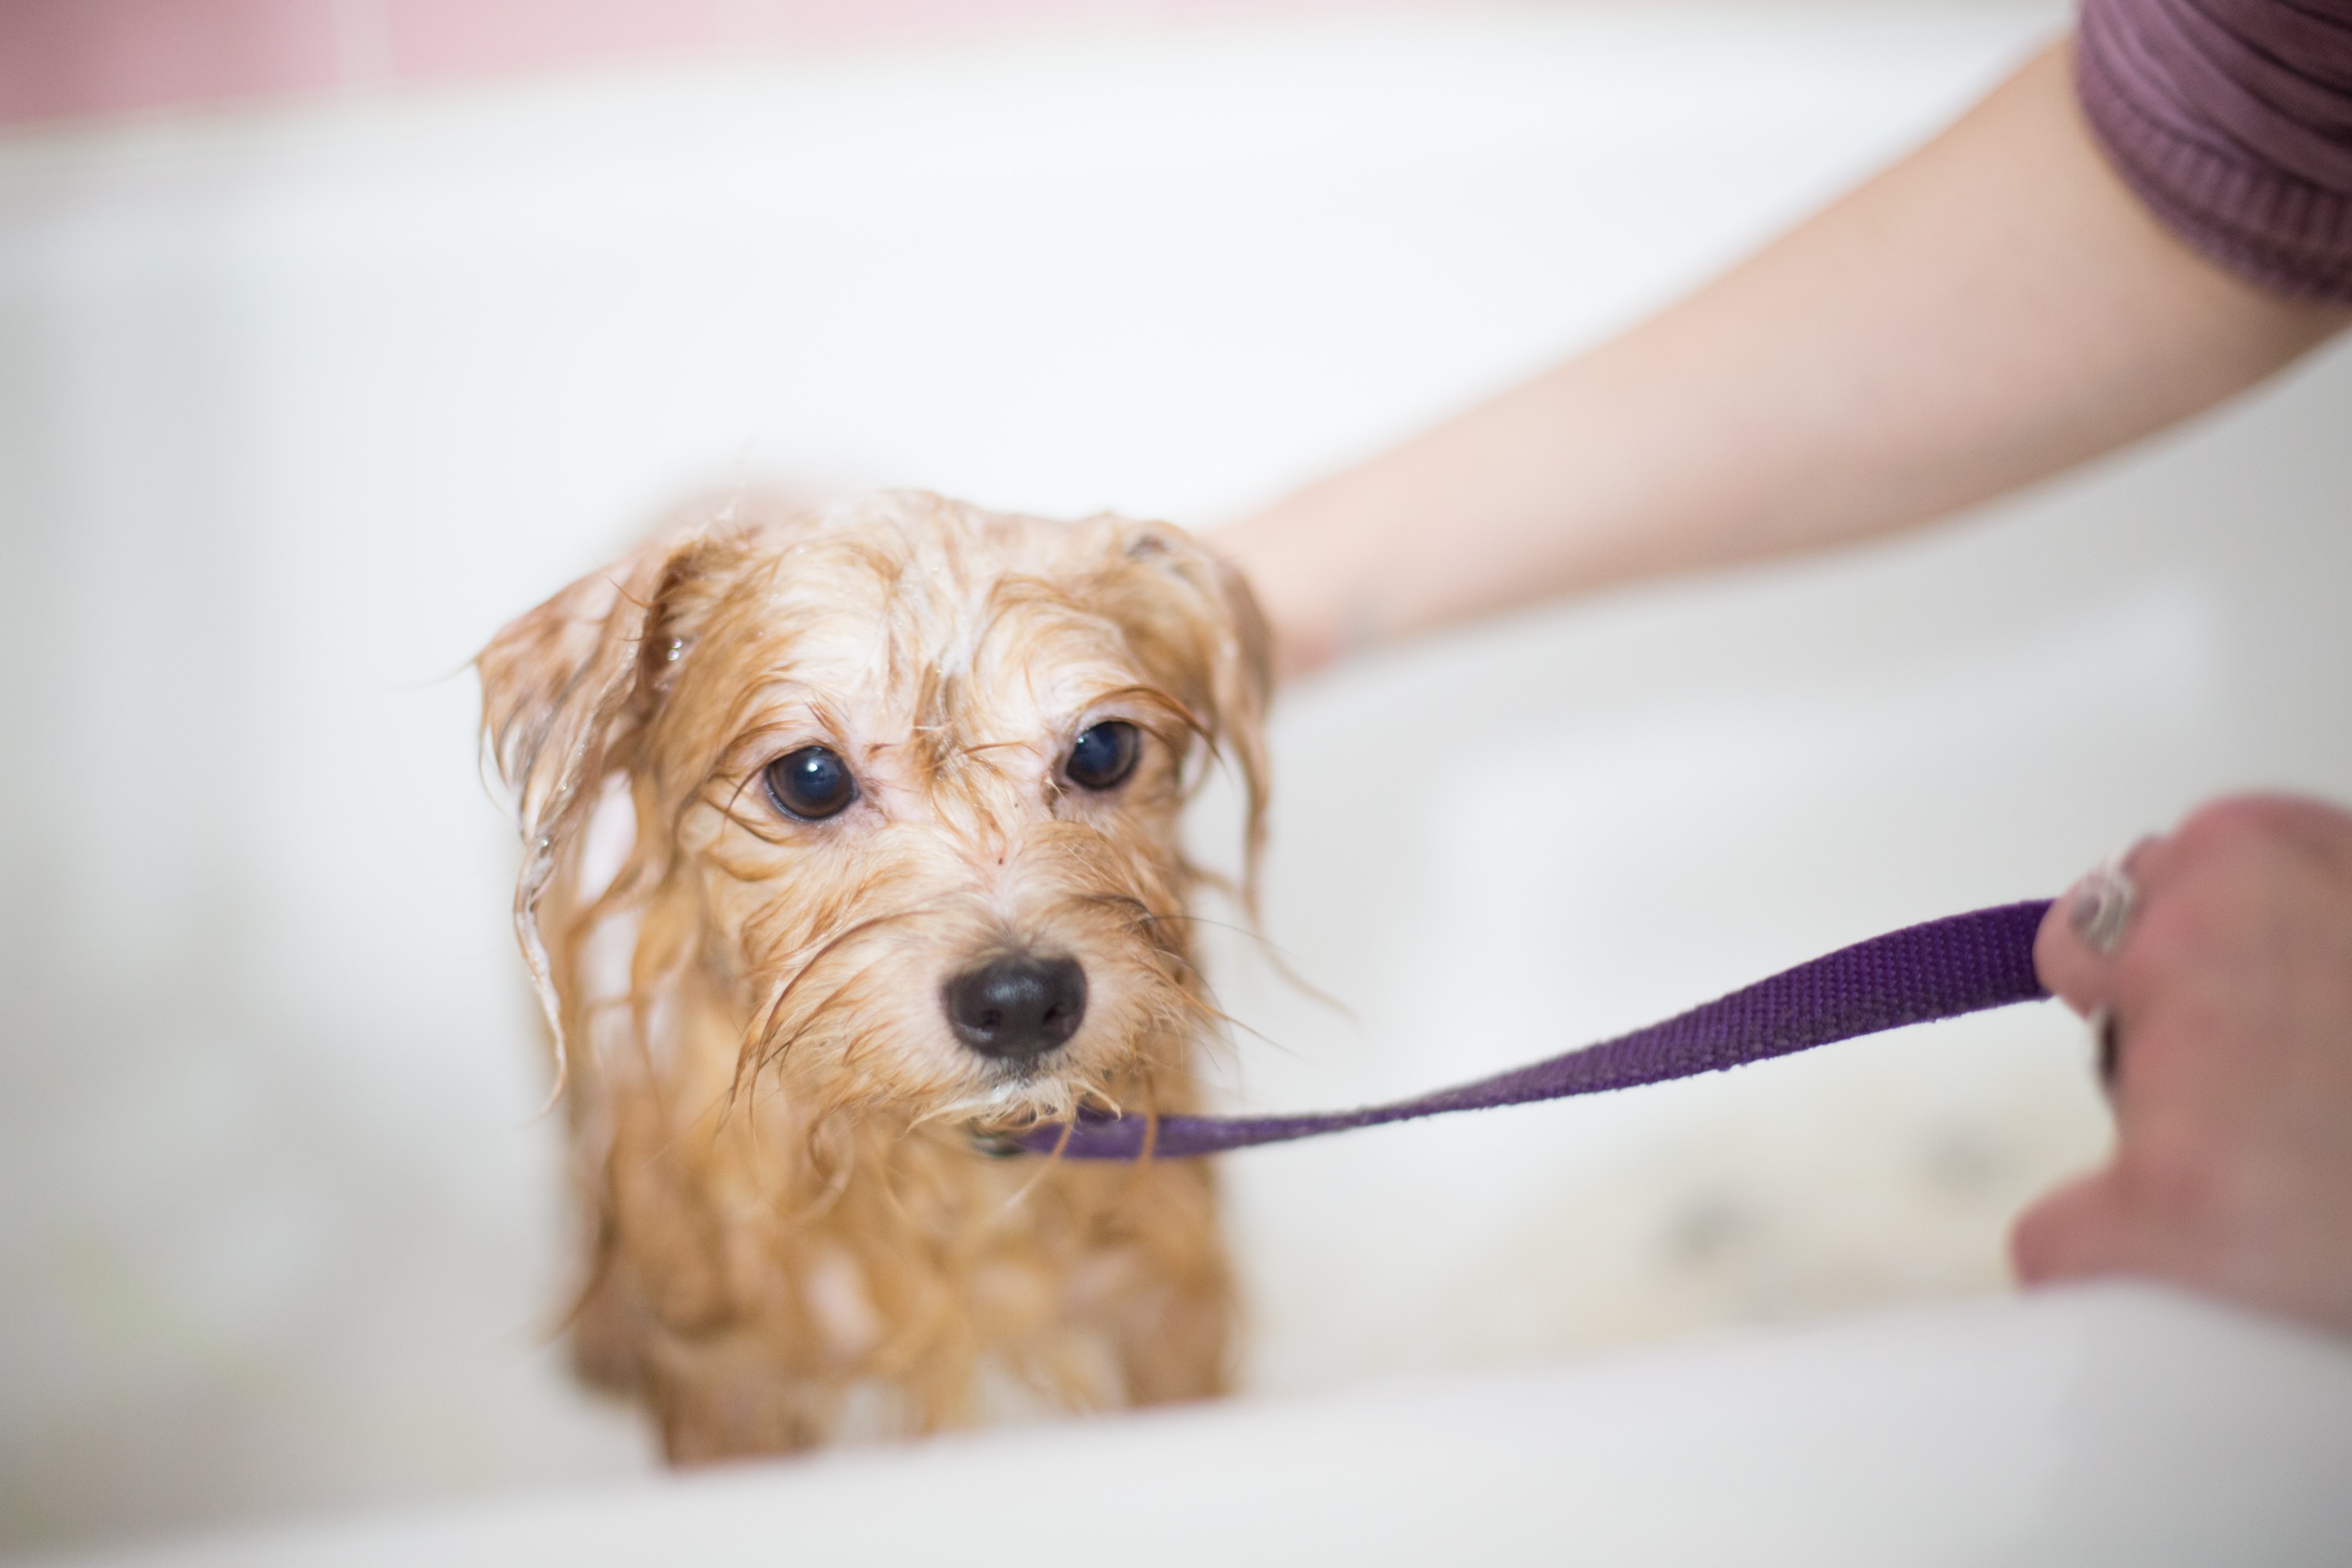 Pet Grooming Salon Business for sale in Suffolk Co